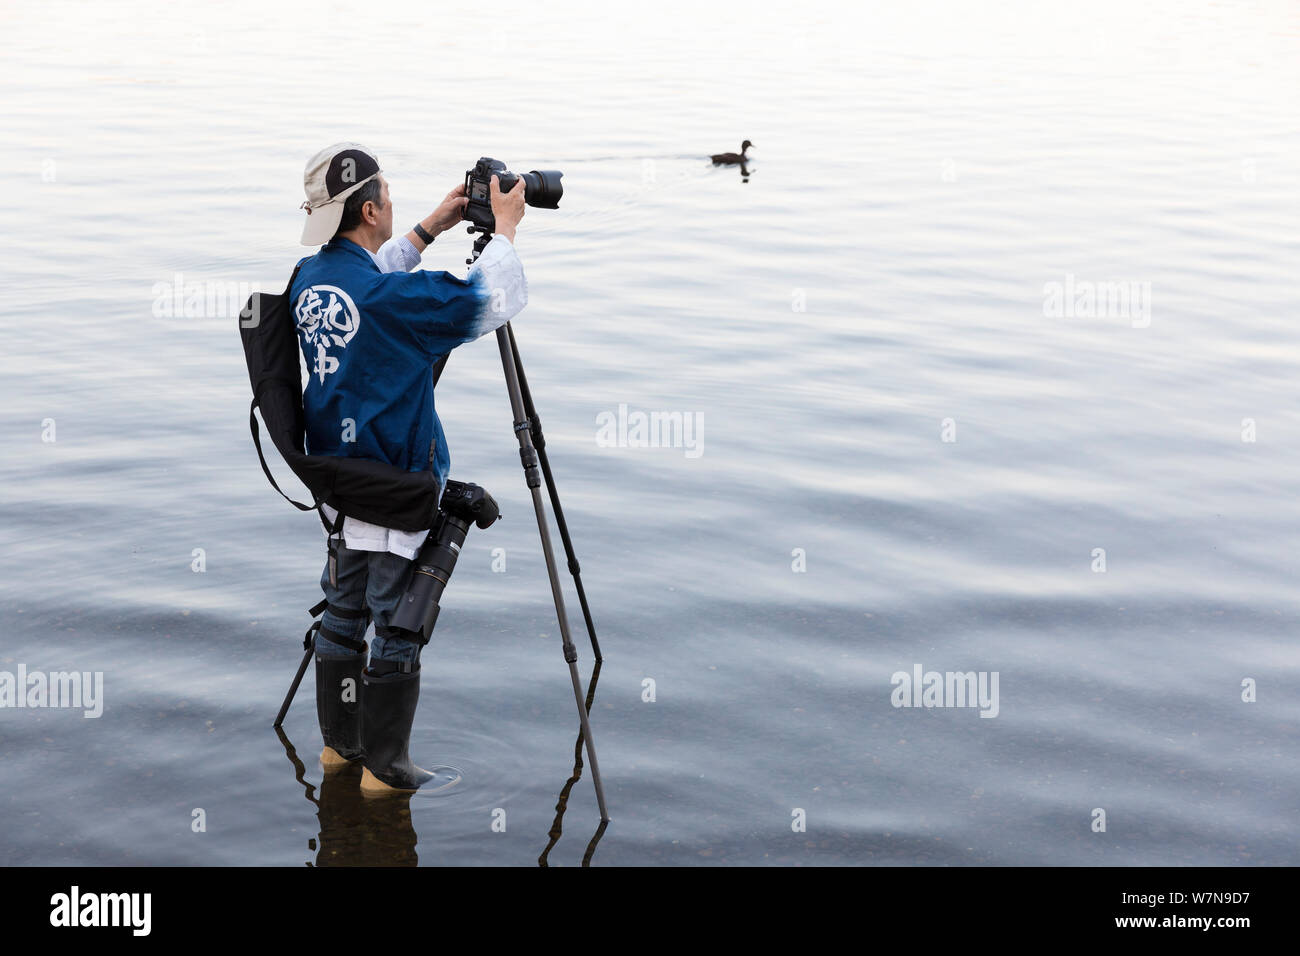 A photographer prepares for the Toro Nagashi Lantern Floating Ceremony in Seattle, Washington on August 6, 2019. “From Hiroshima To Hope” is held in remembrance of atomic bomb victims on the anniversary of the bombing of Hiroshima, Japan. The ceremony, organized by a collation of peace, religious, civil liberties and cultural heritage organizations, honors victims of the bombings of Hiroshima and Nagasaki, and all victims of violence. It is an adaptation of an ancient Japanese Buddhist ritual, the Toro Nagashi, in which lanterns representing the souls of the dead are floated out to sea and pra Stock Photo